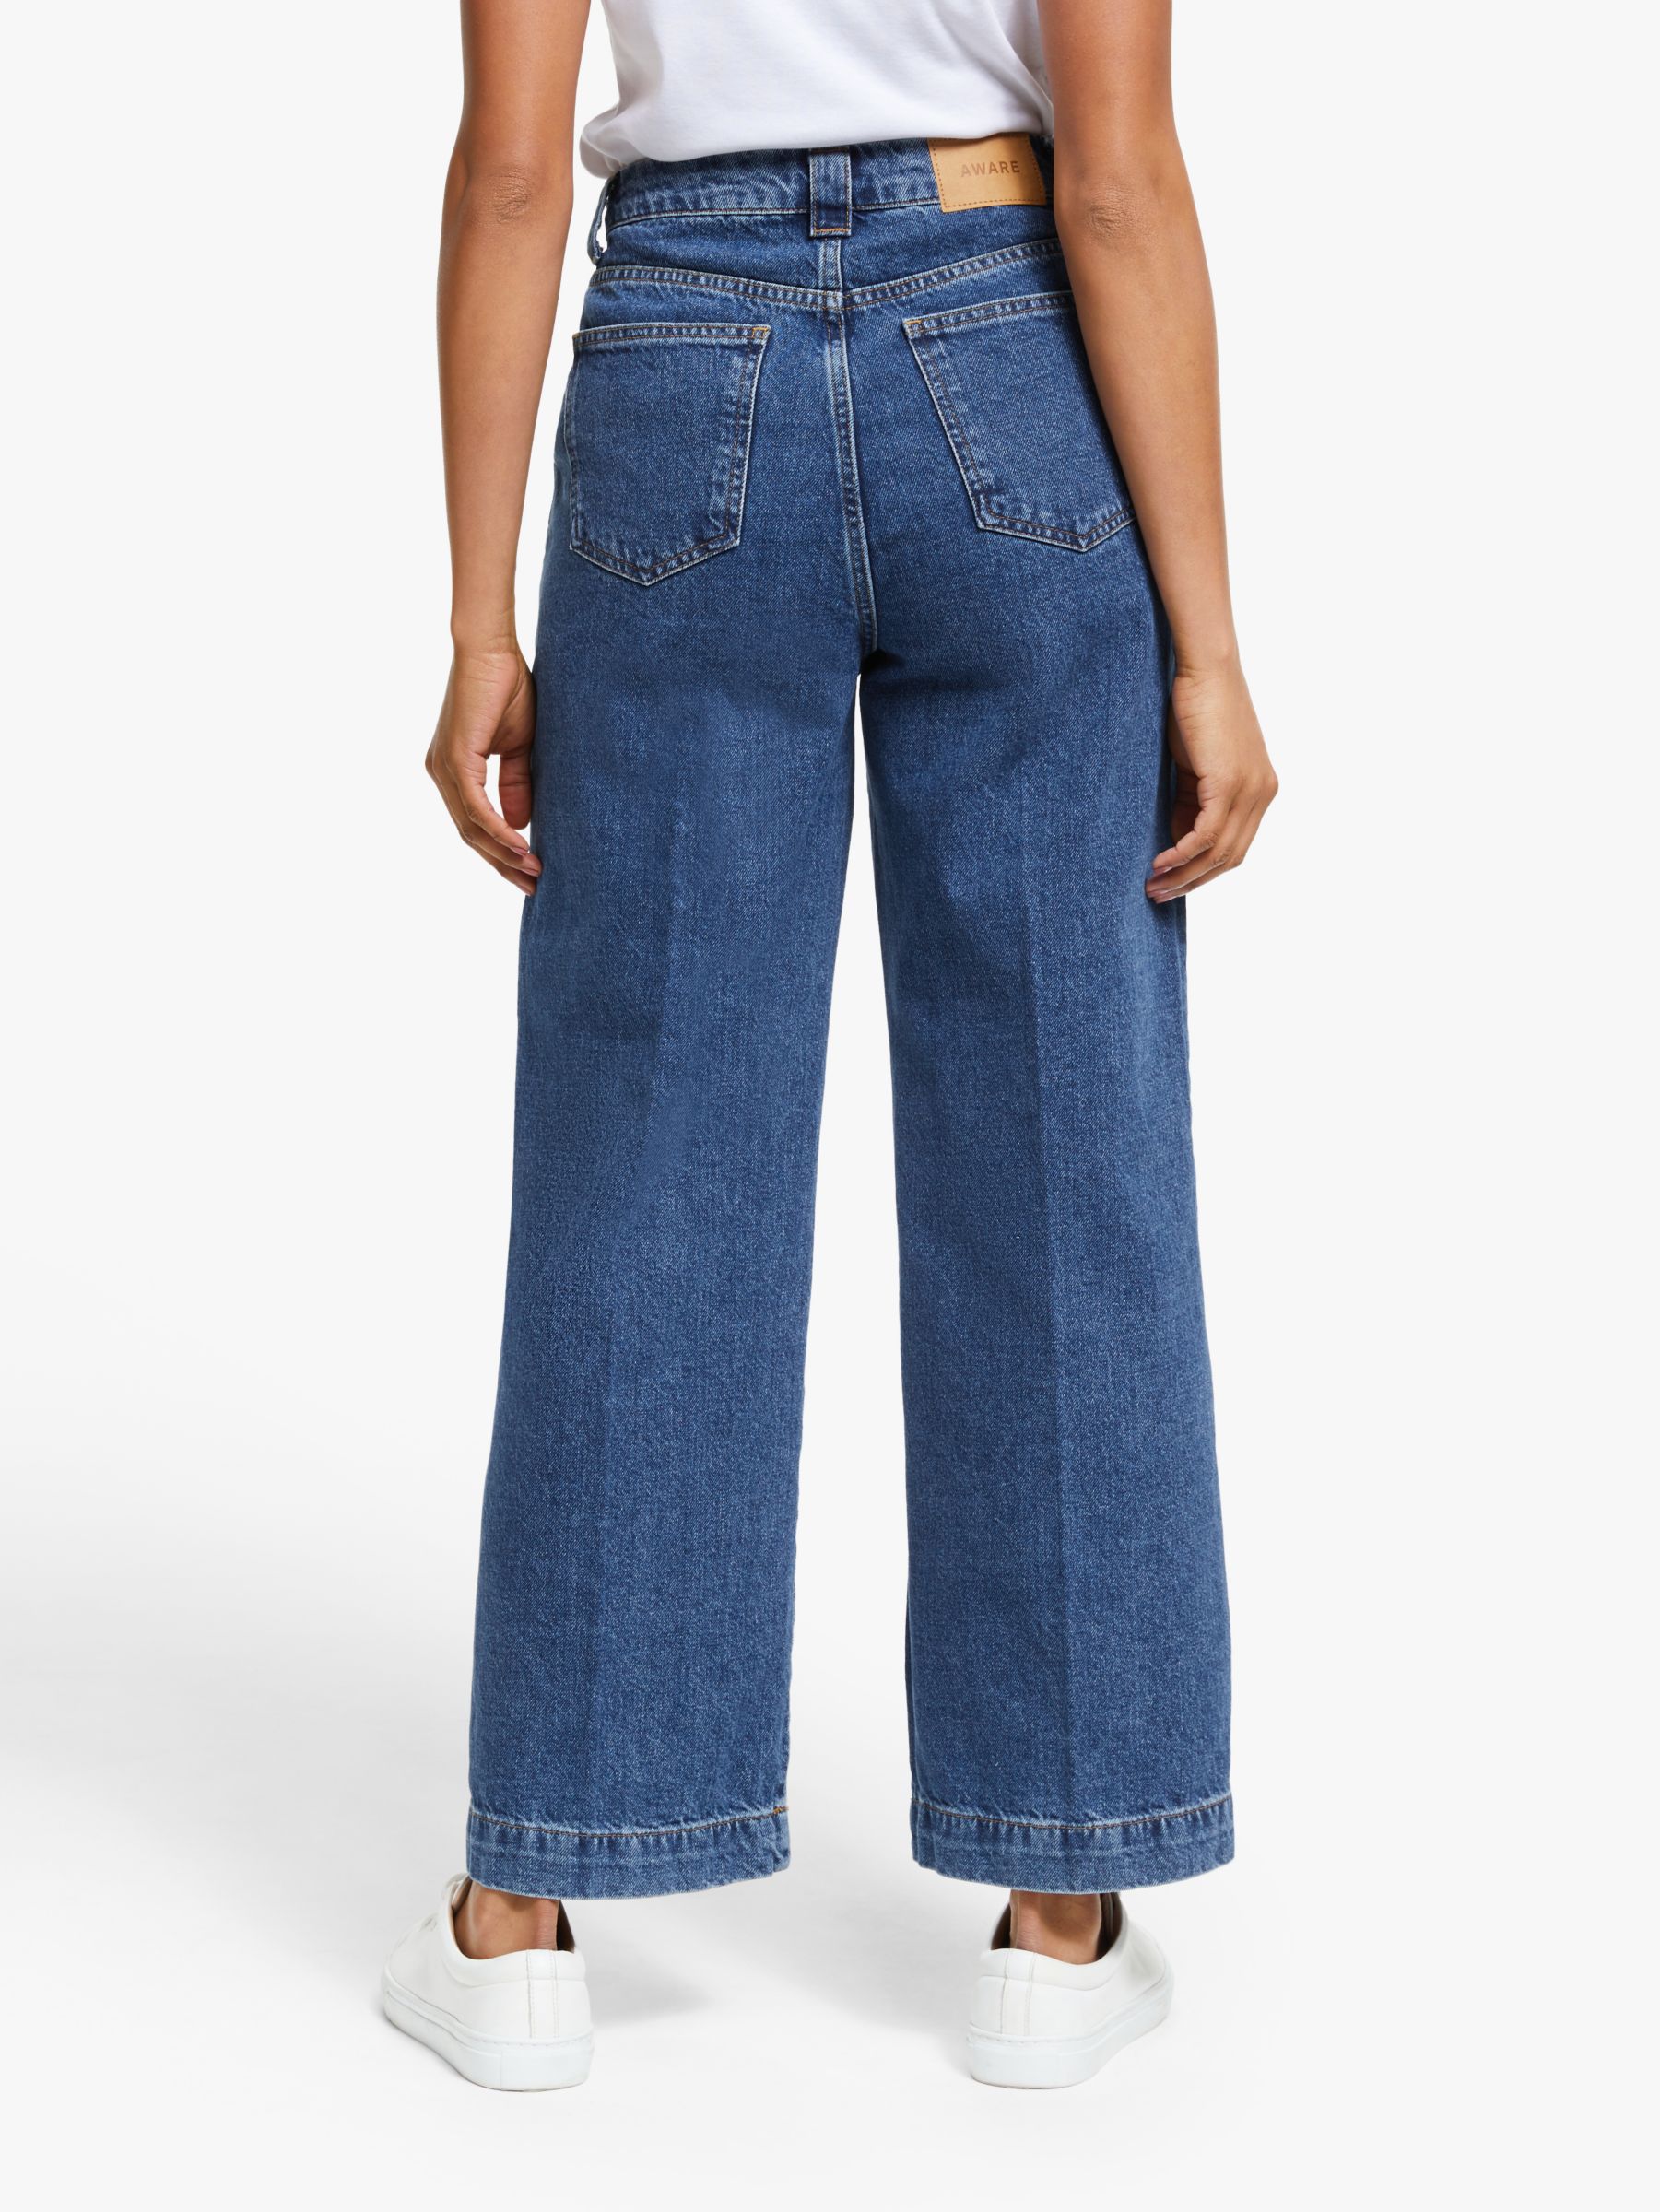 Levis high waisted ripped jeans cheap near